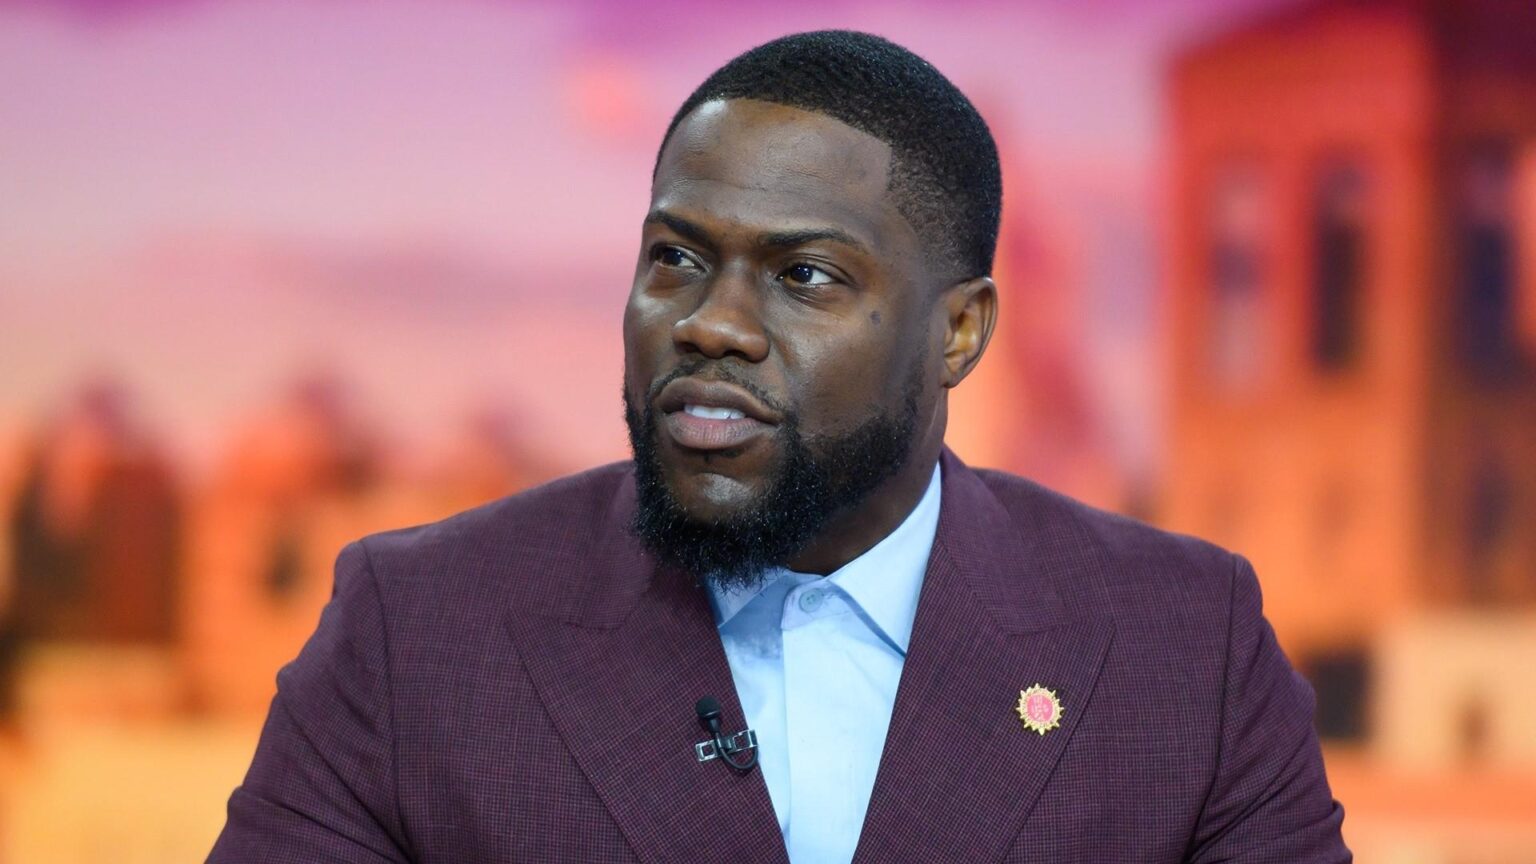 Kevin Hart Net Worth Guide